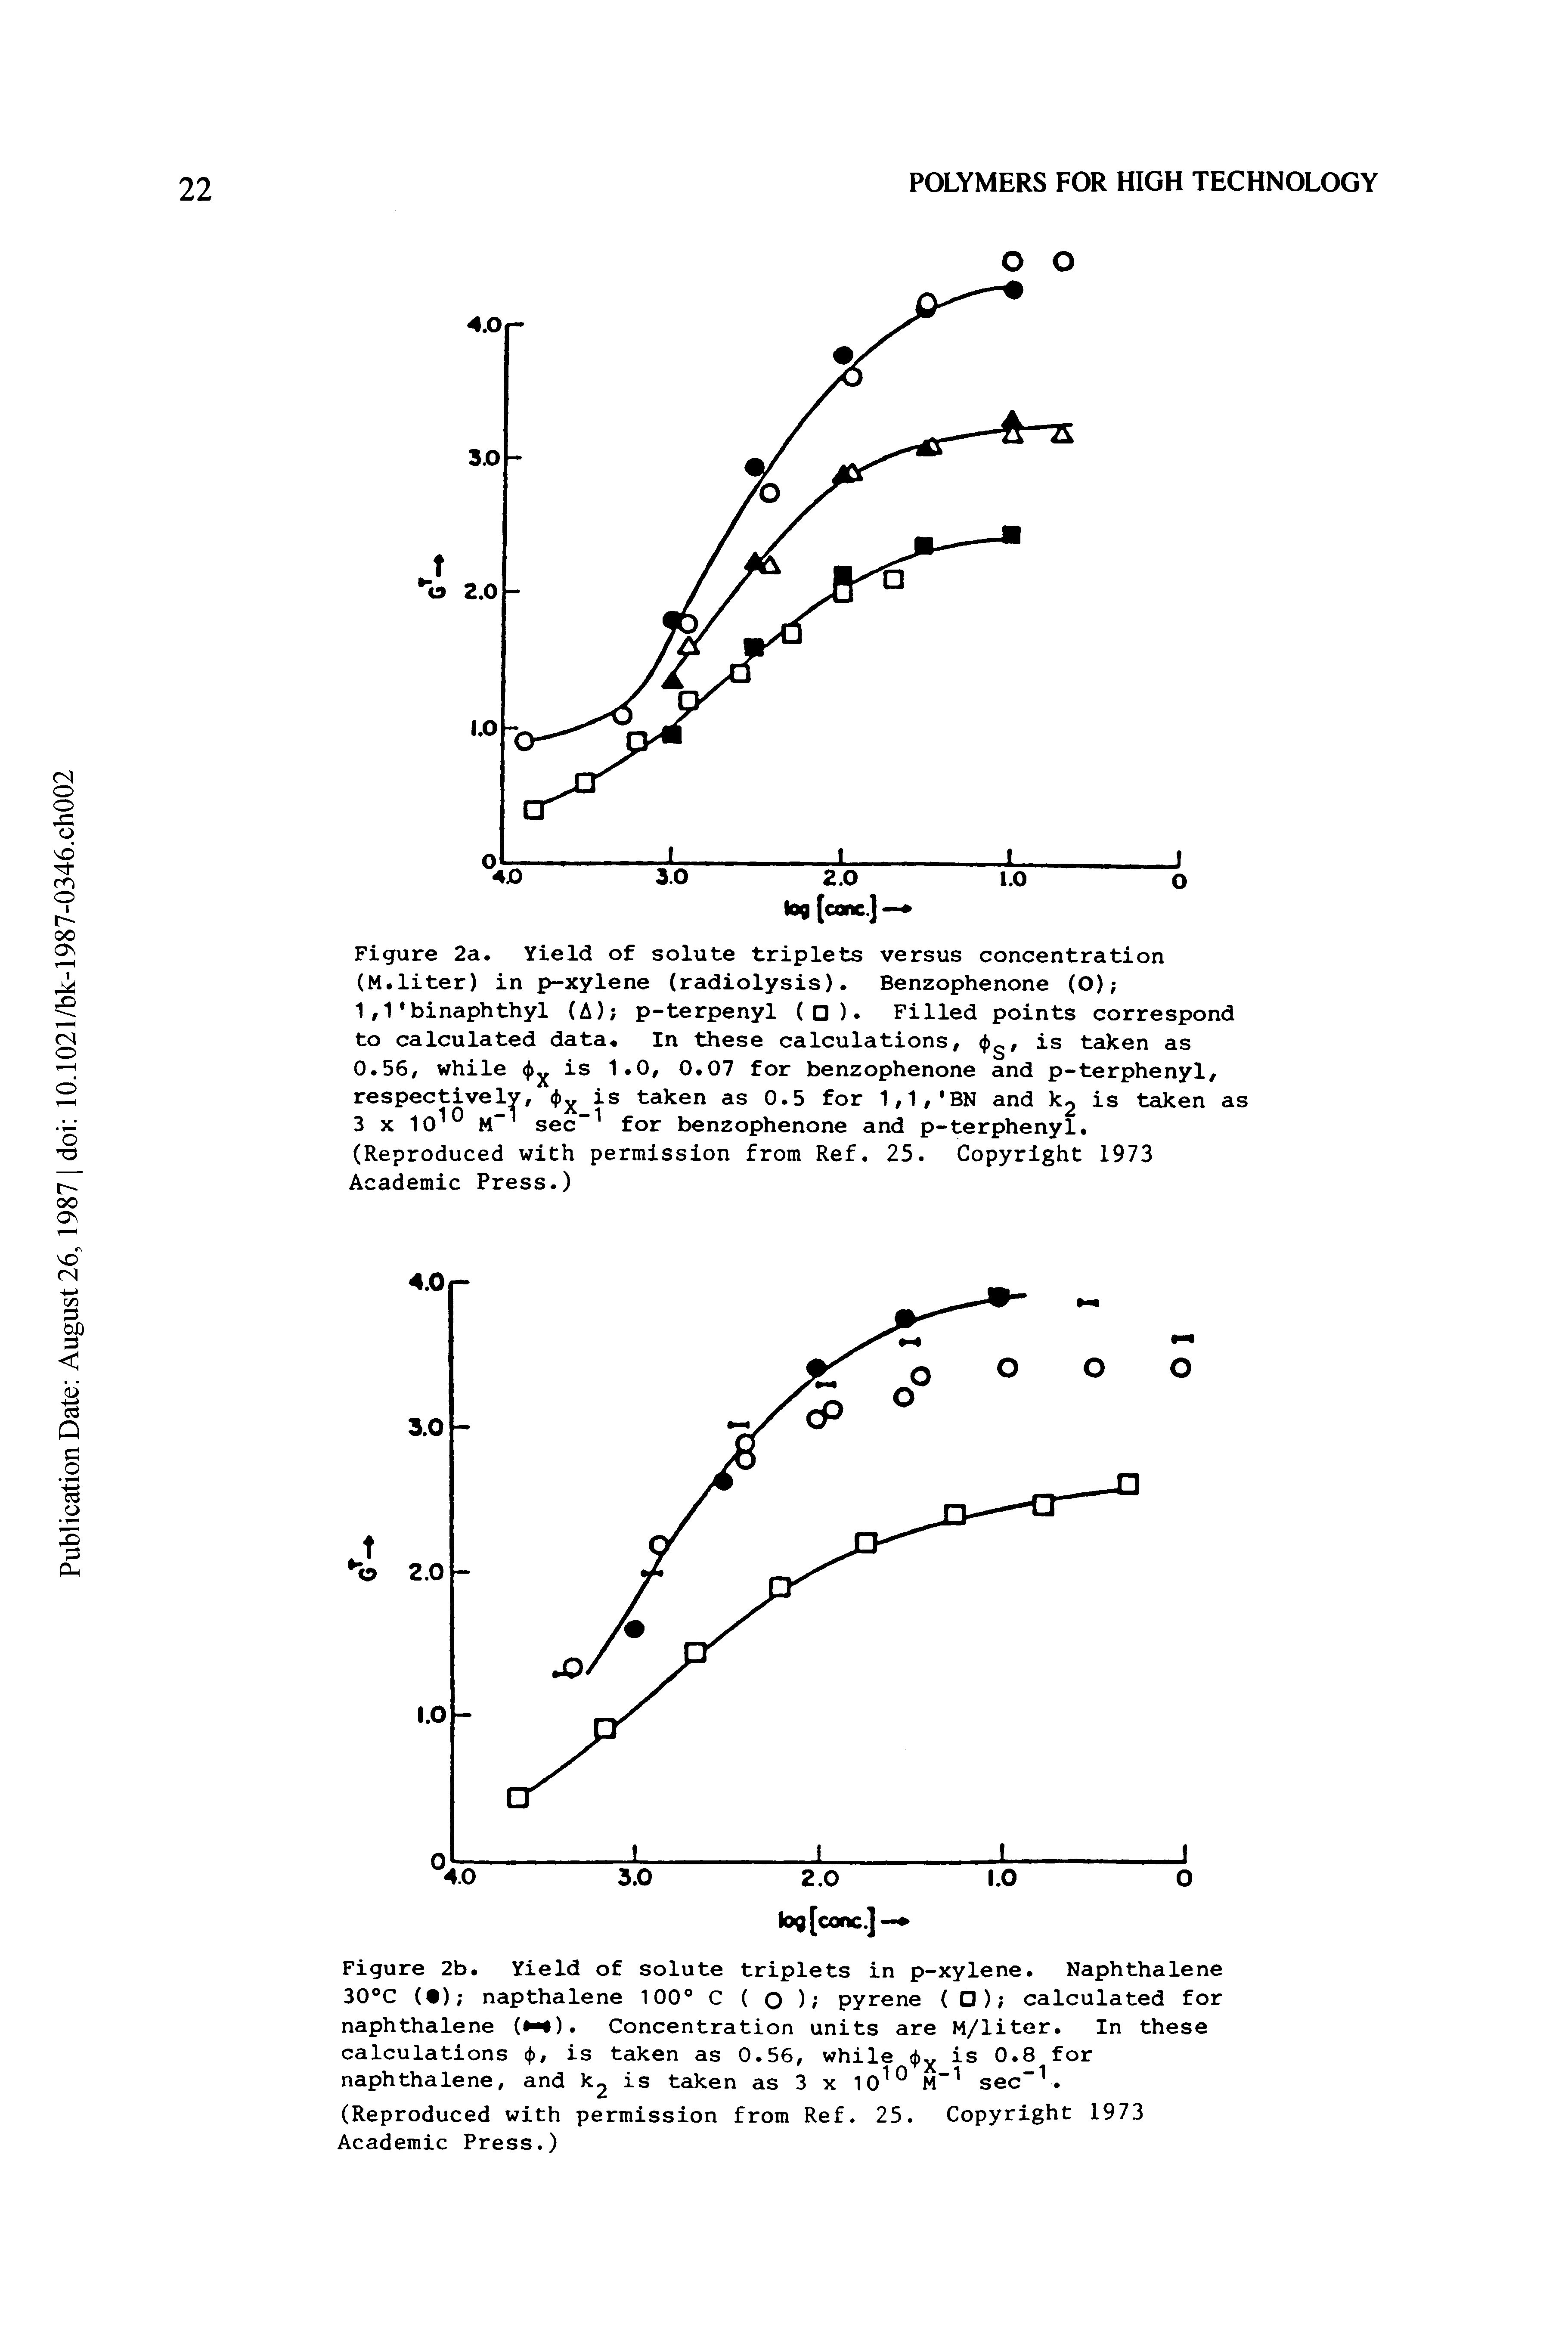 Figure 2b. Yield of solute triplets in p-xylene. Naphthalene 30 C ( ) napthalene 100 C ( o ) pyrene ( ) calculated for naphthalene ( ). Concentration units are M/liter. In these calculations (J), is taken as 0.56, while is 0.8 for naphthalene, and ) 2 taken as 3 x 10 M sec". ...